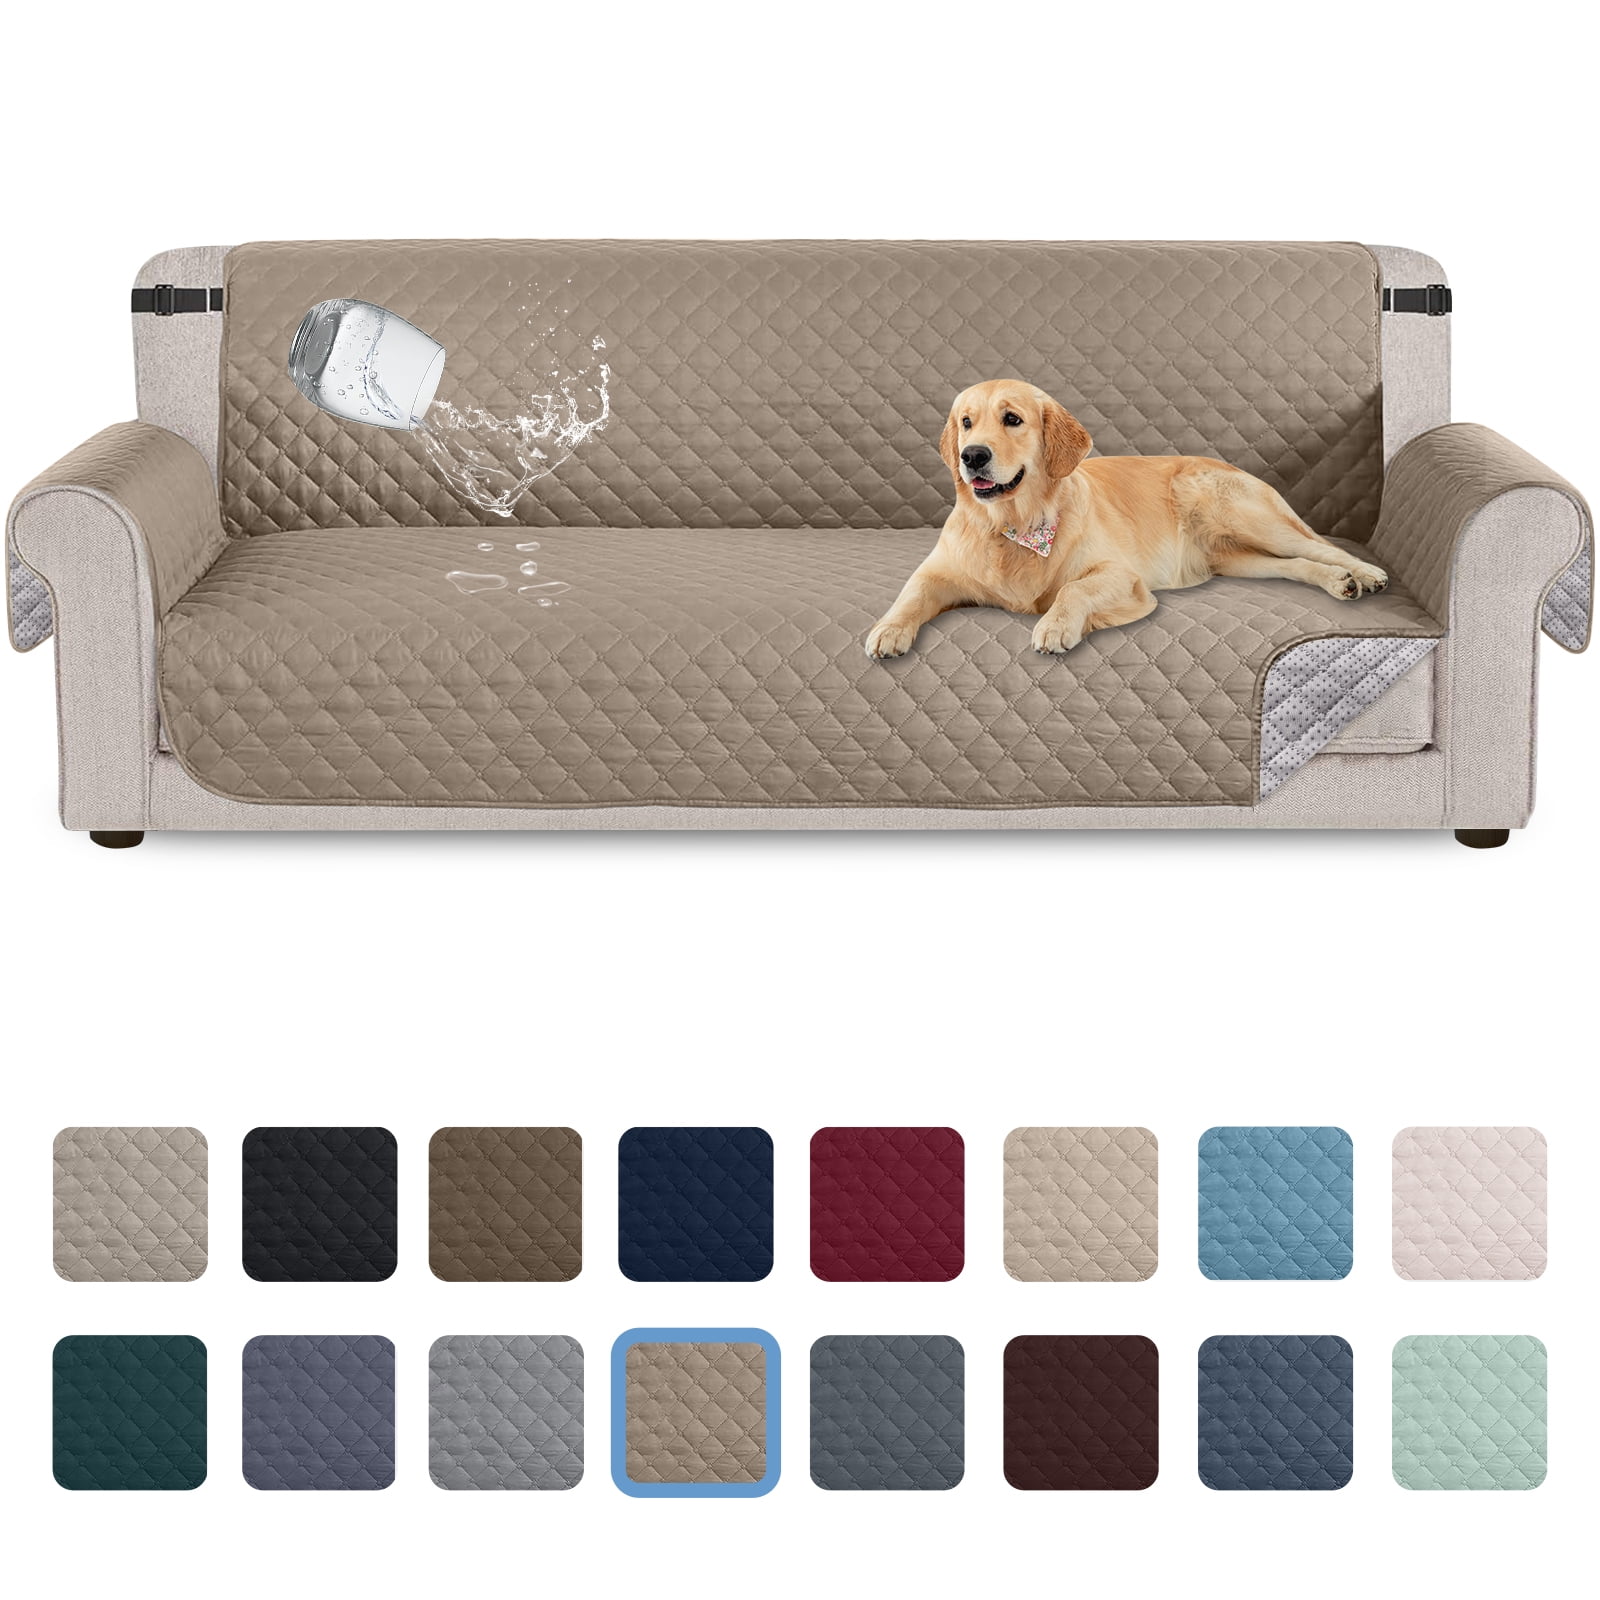  XMAYODS Quilted Couch Cover for Dogs Sofa Covers for 1/2/3/4  Cushion Couch,Water Resistant Furniture Covers for Pets, Dog Couch Cover  Protector with Elastic (Color : #1, Size : 3 Seater) : Home & Kitchen